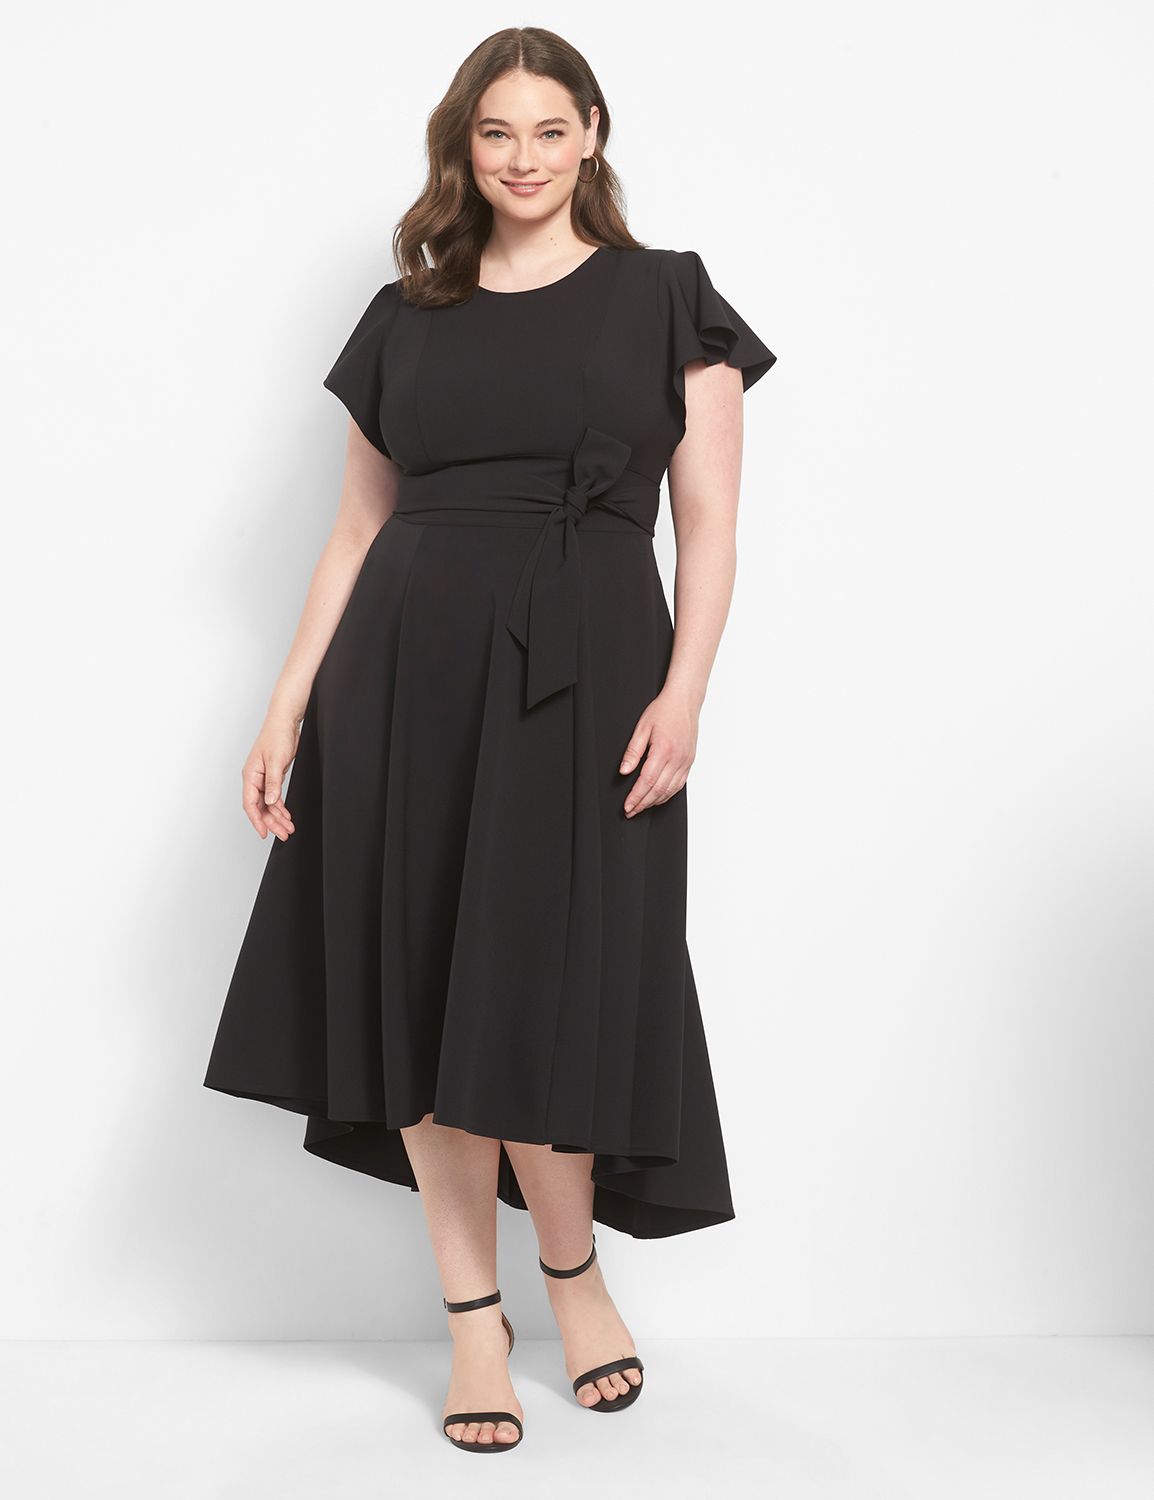 The Lena Dress By Lane Bryant in Violet